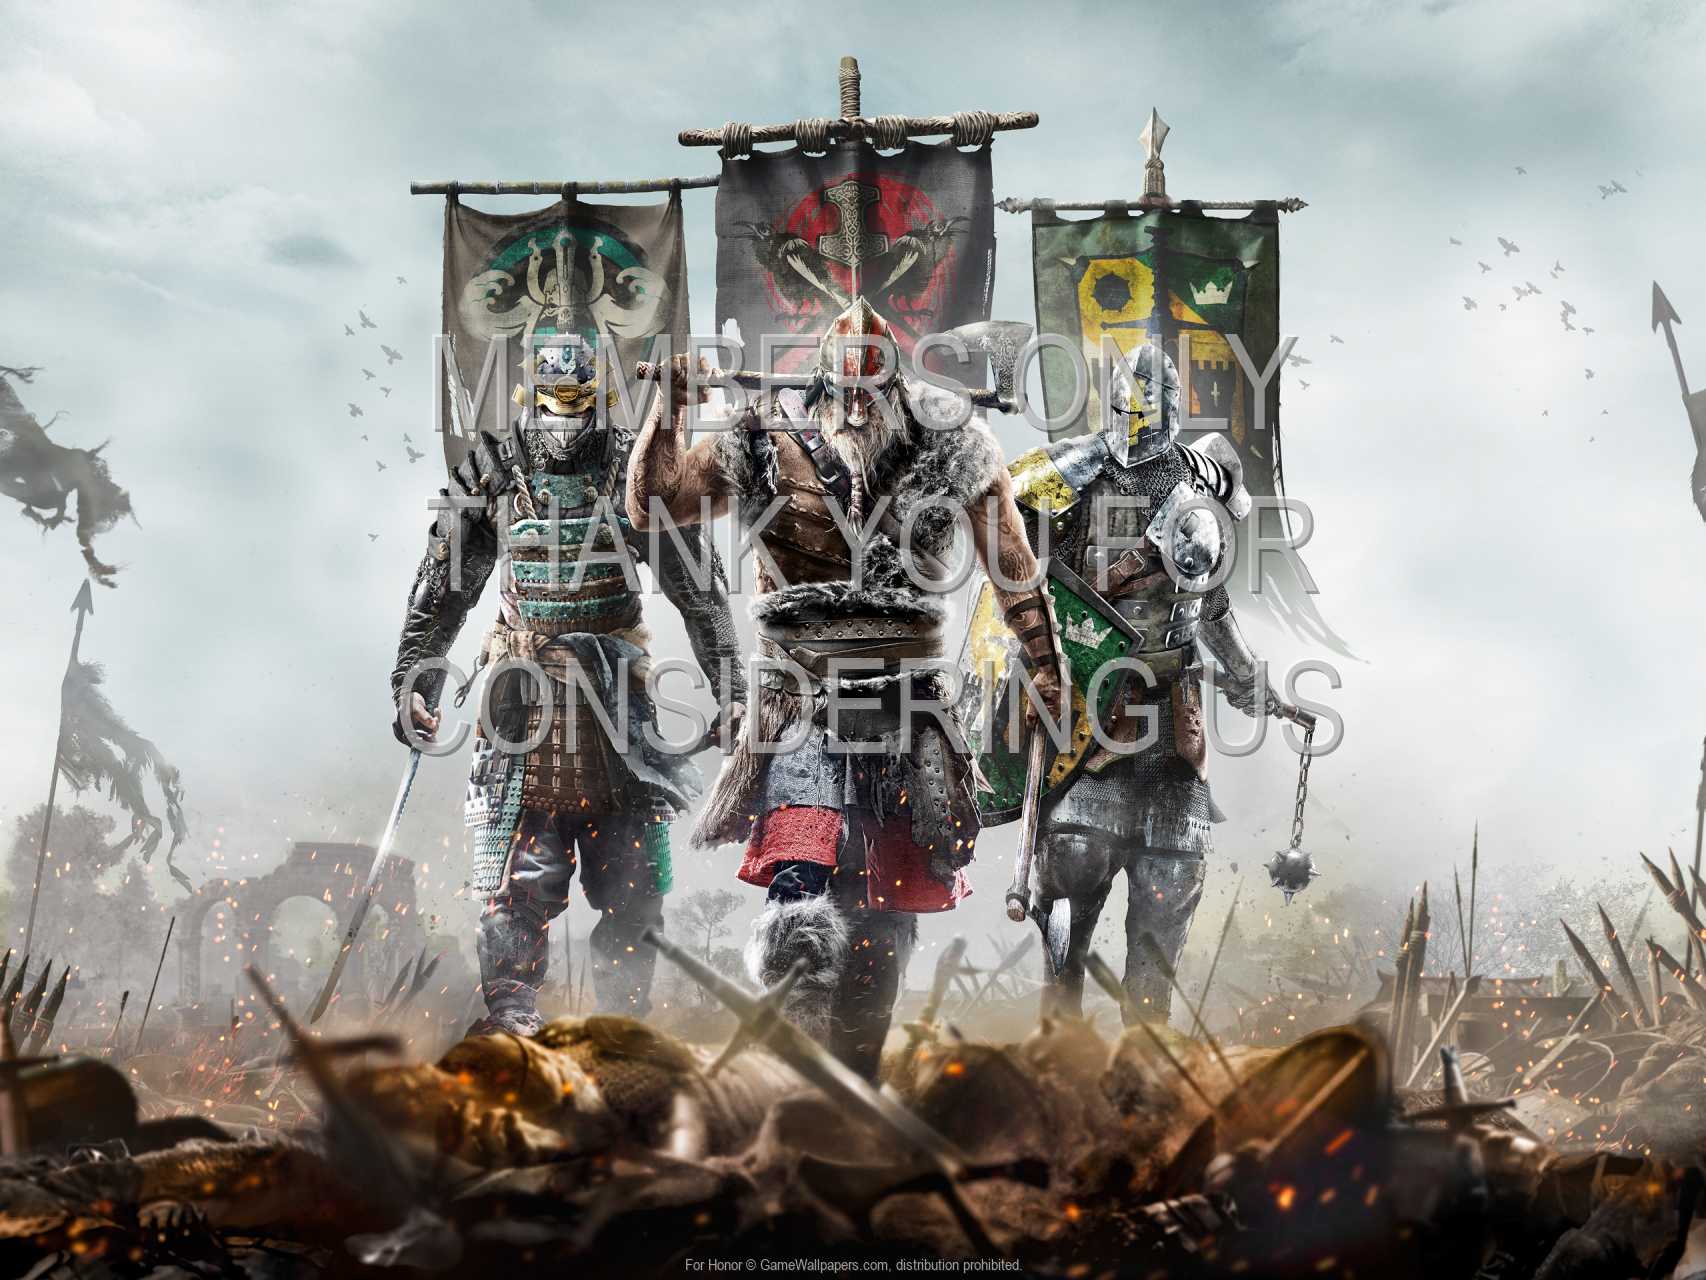 For Honor 720p%20Horizontal Mobile wallpaper or background 01